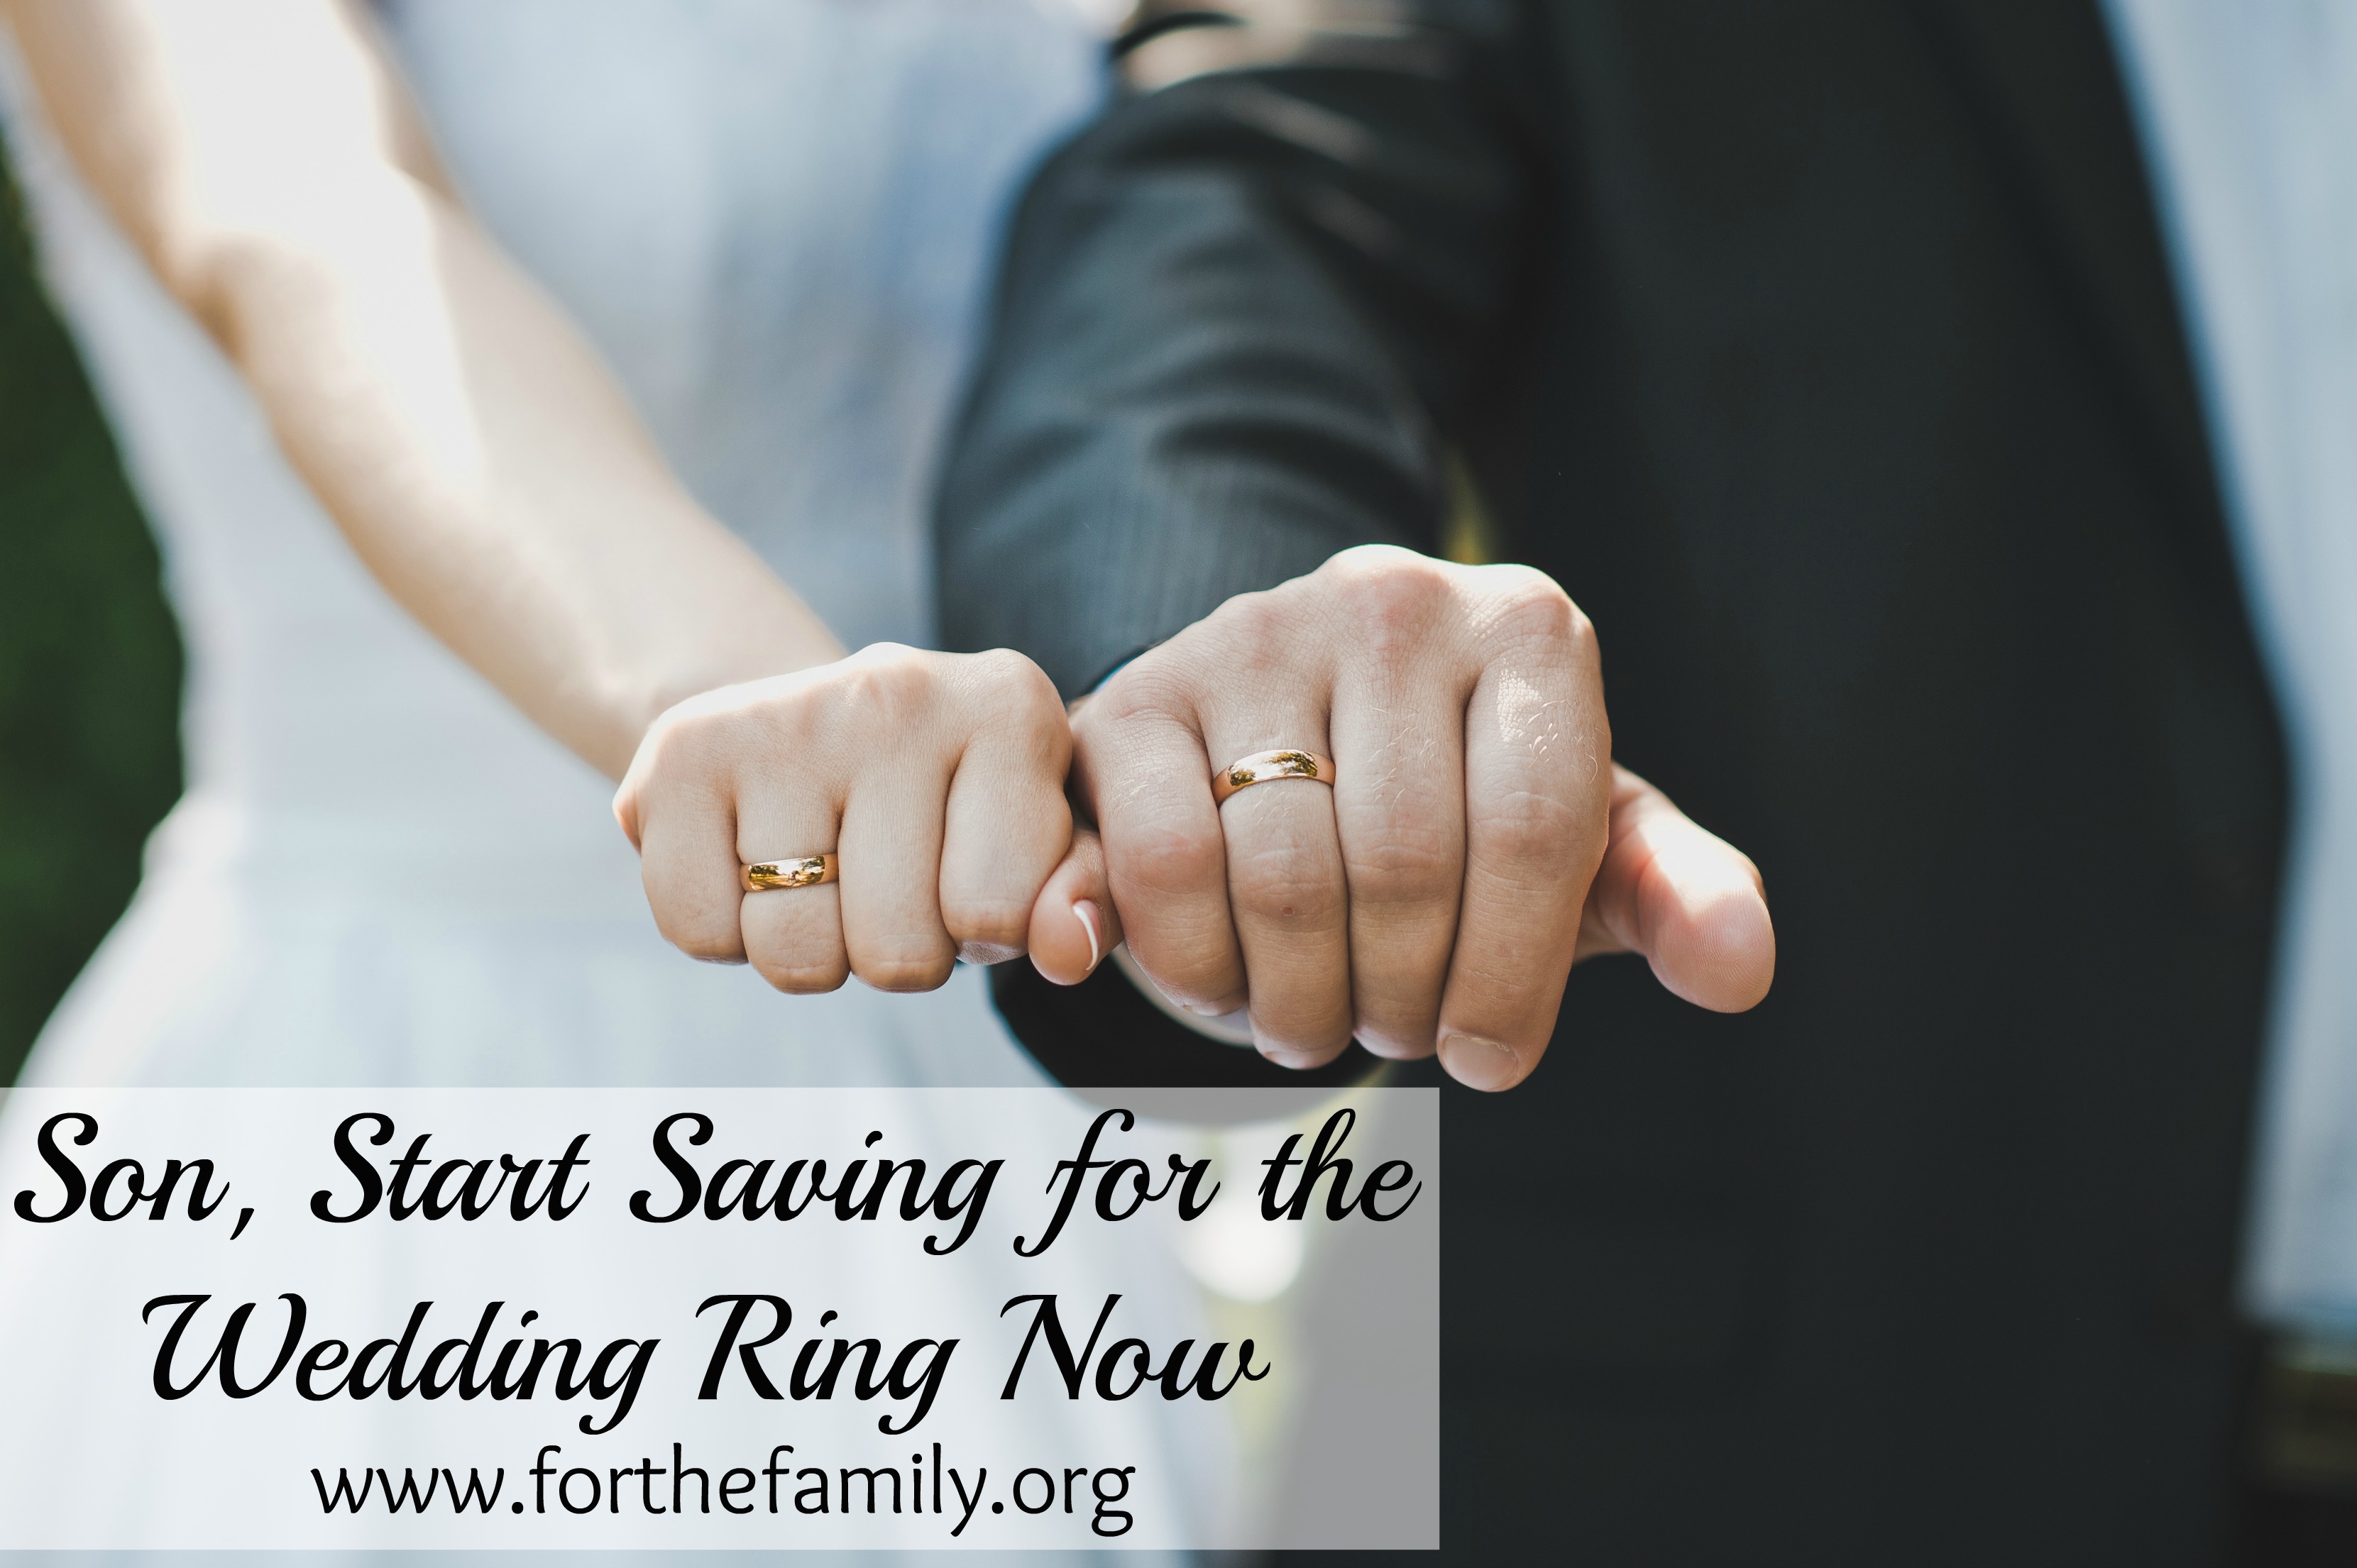 Save for a wedding ring